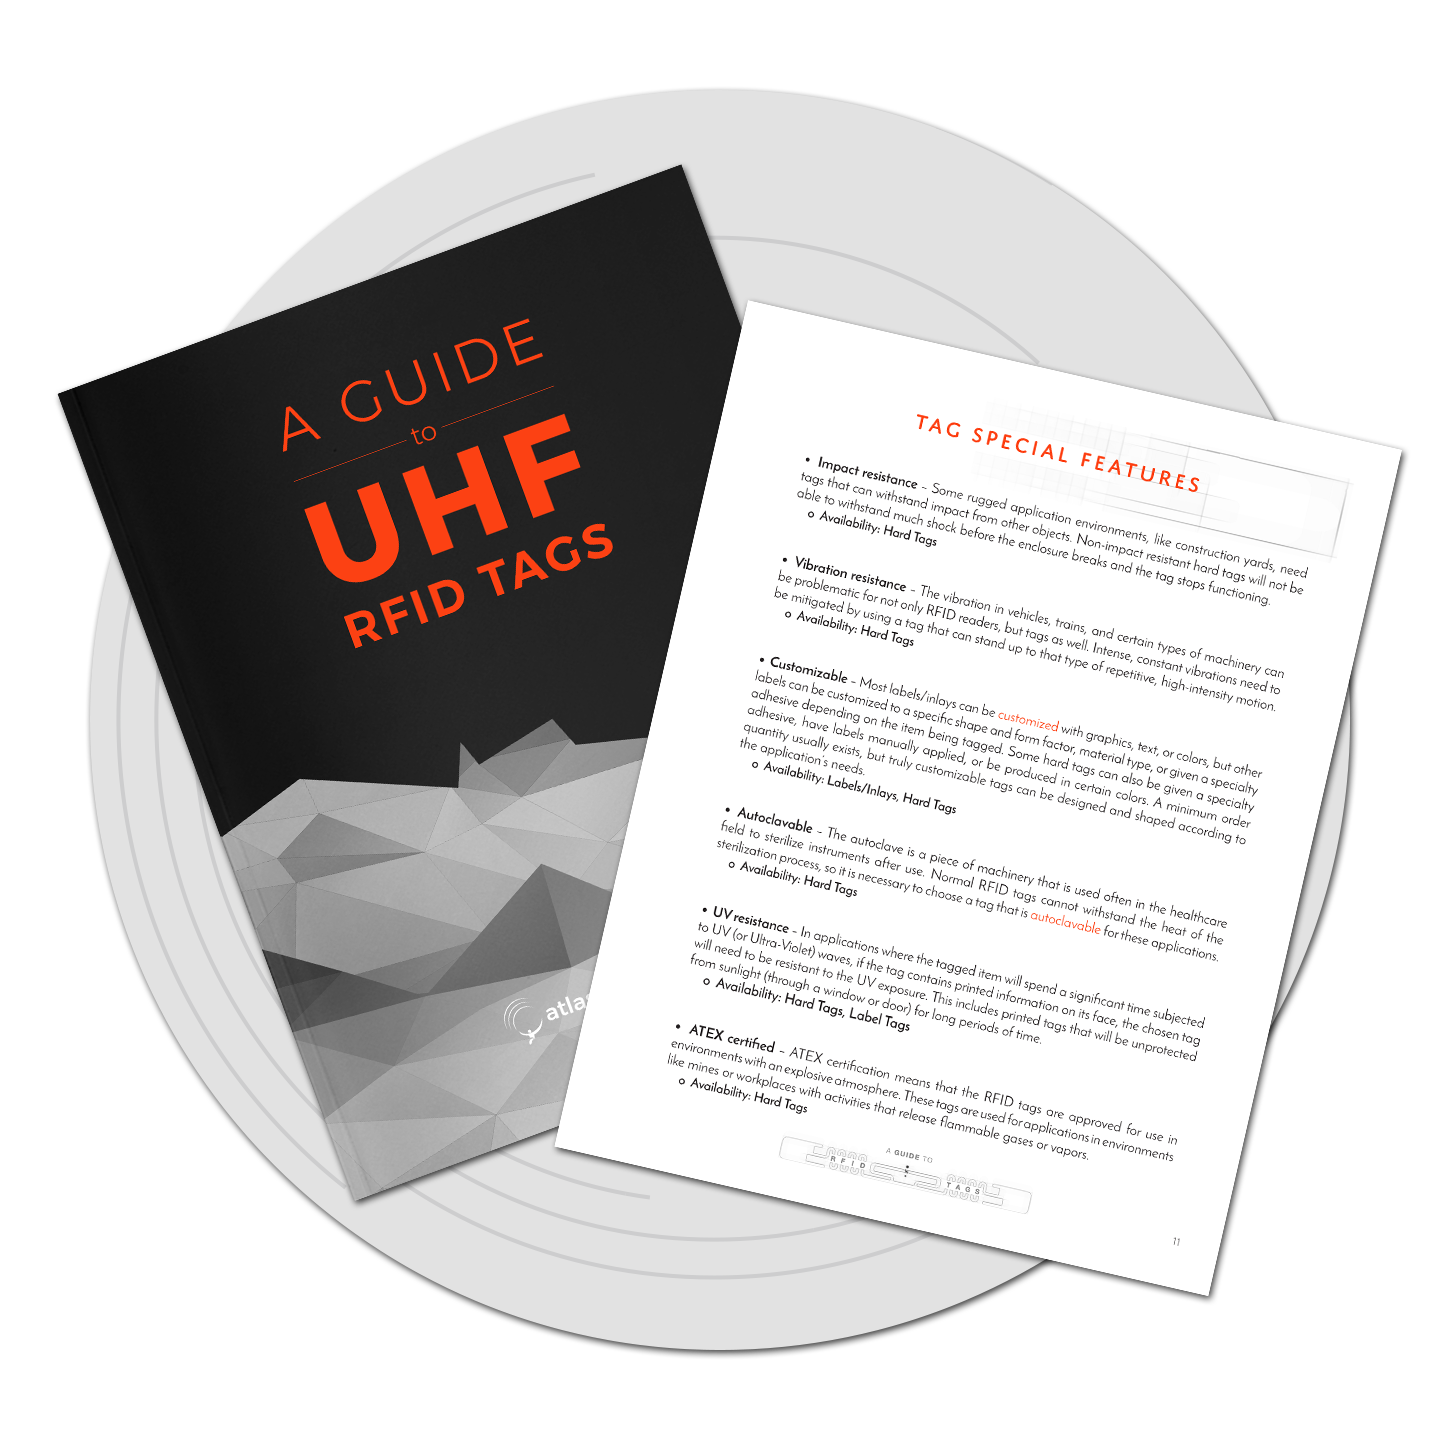 A Guide to UHF RFID Tags